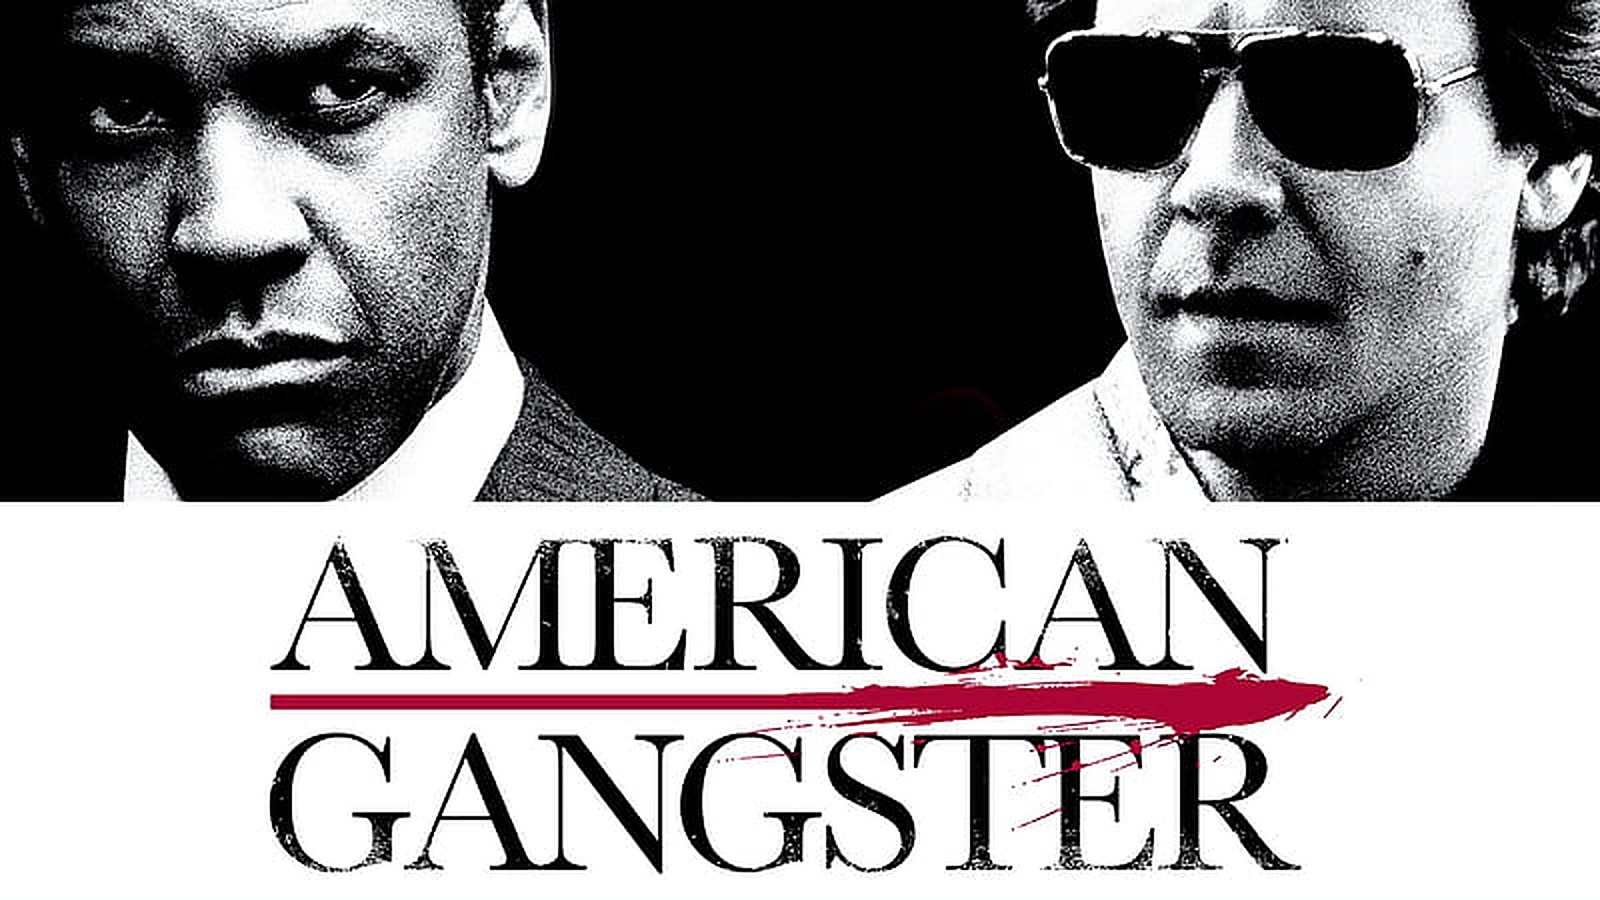 39 Facts about the movie American Gangster 